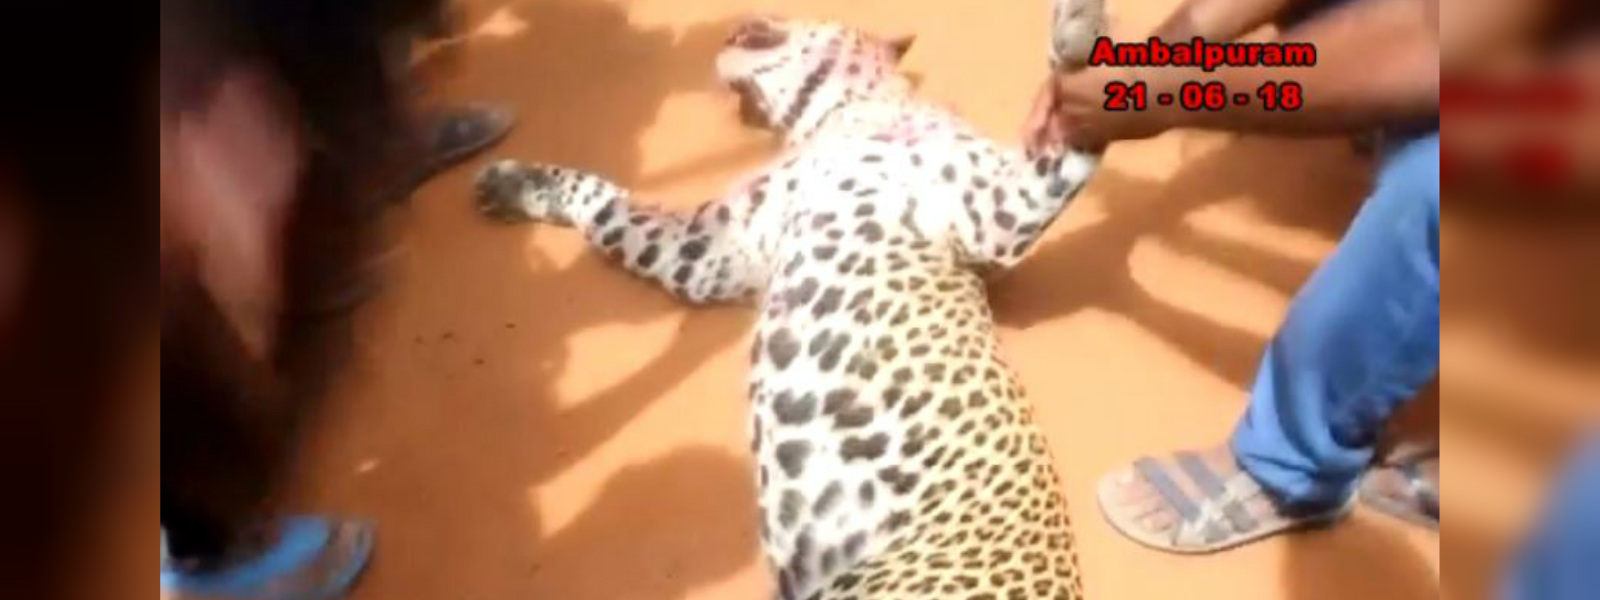 Suspect arrested in connection to leopard killing